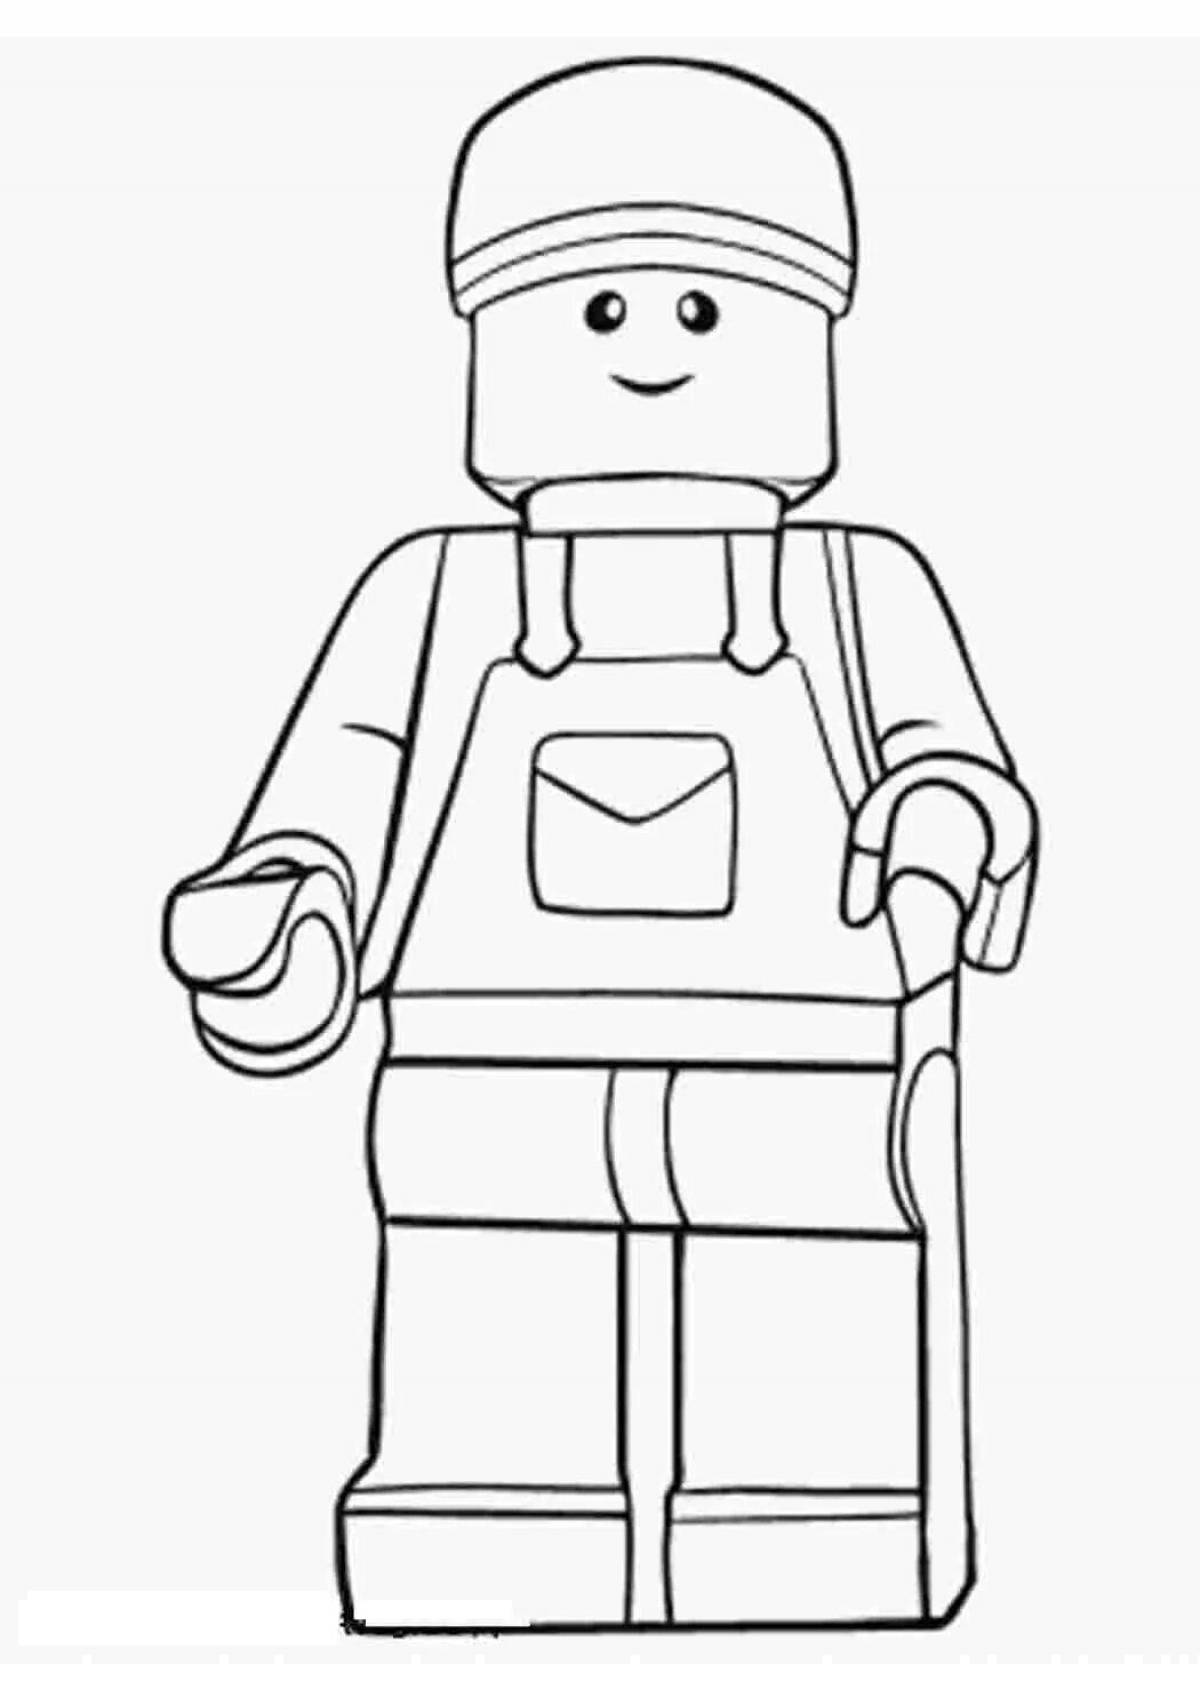 Colourful coloring lego men for kids